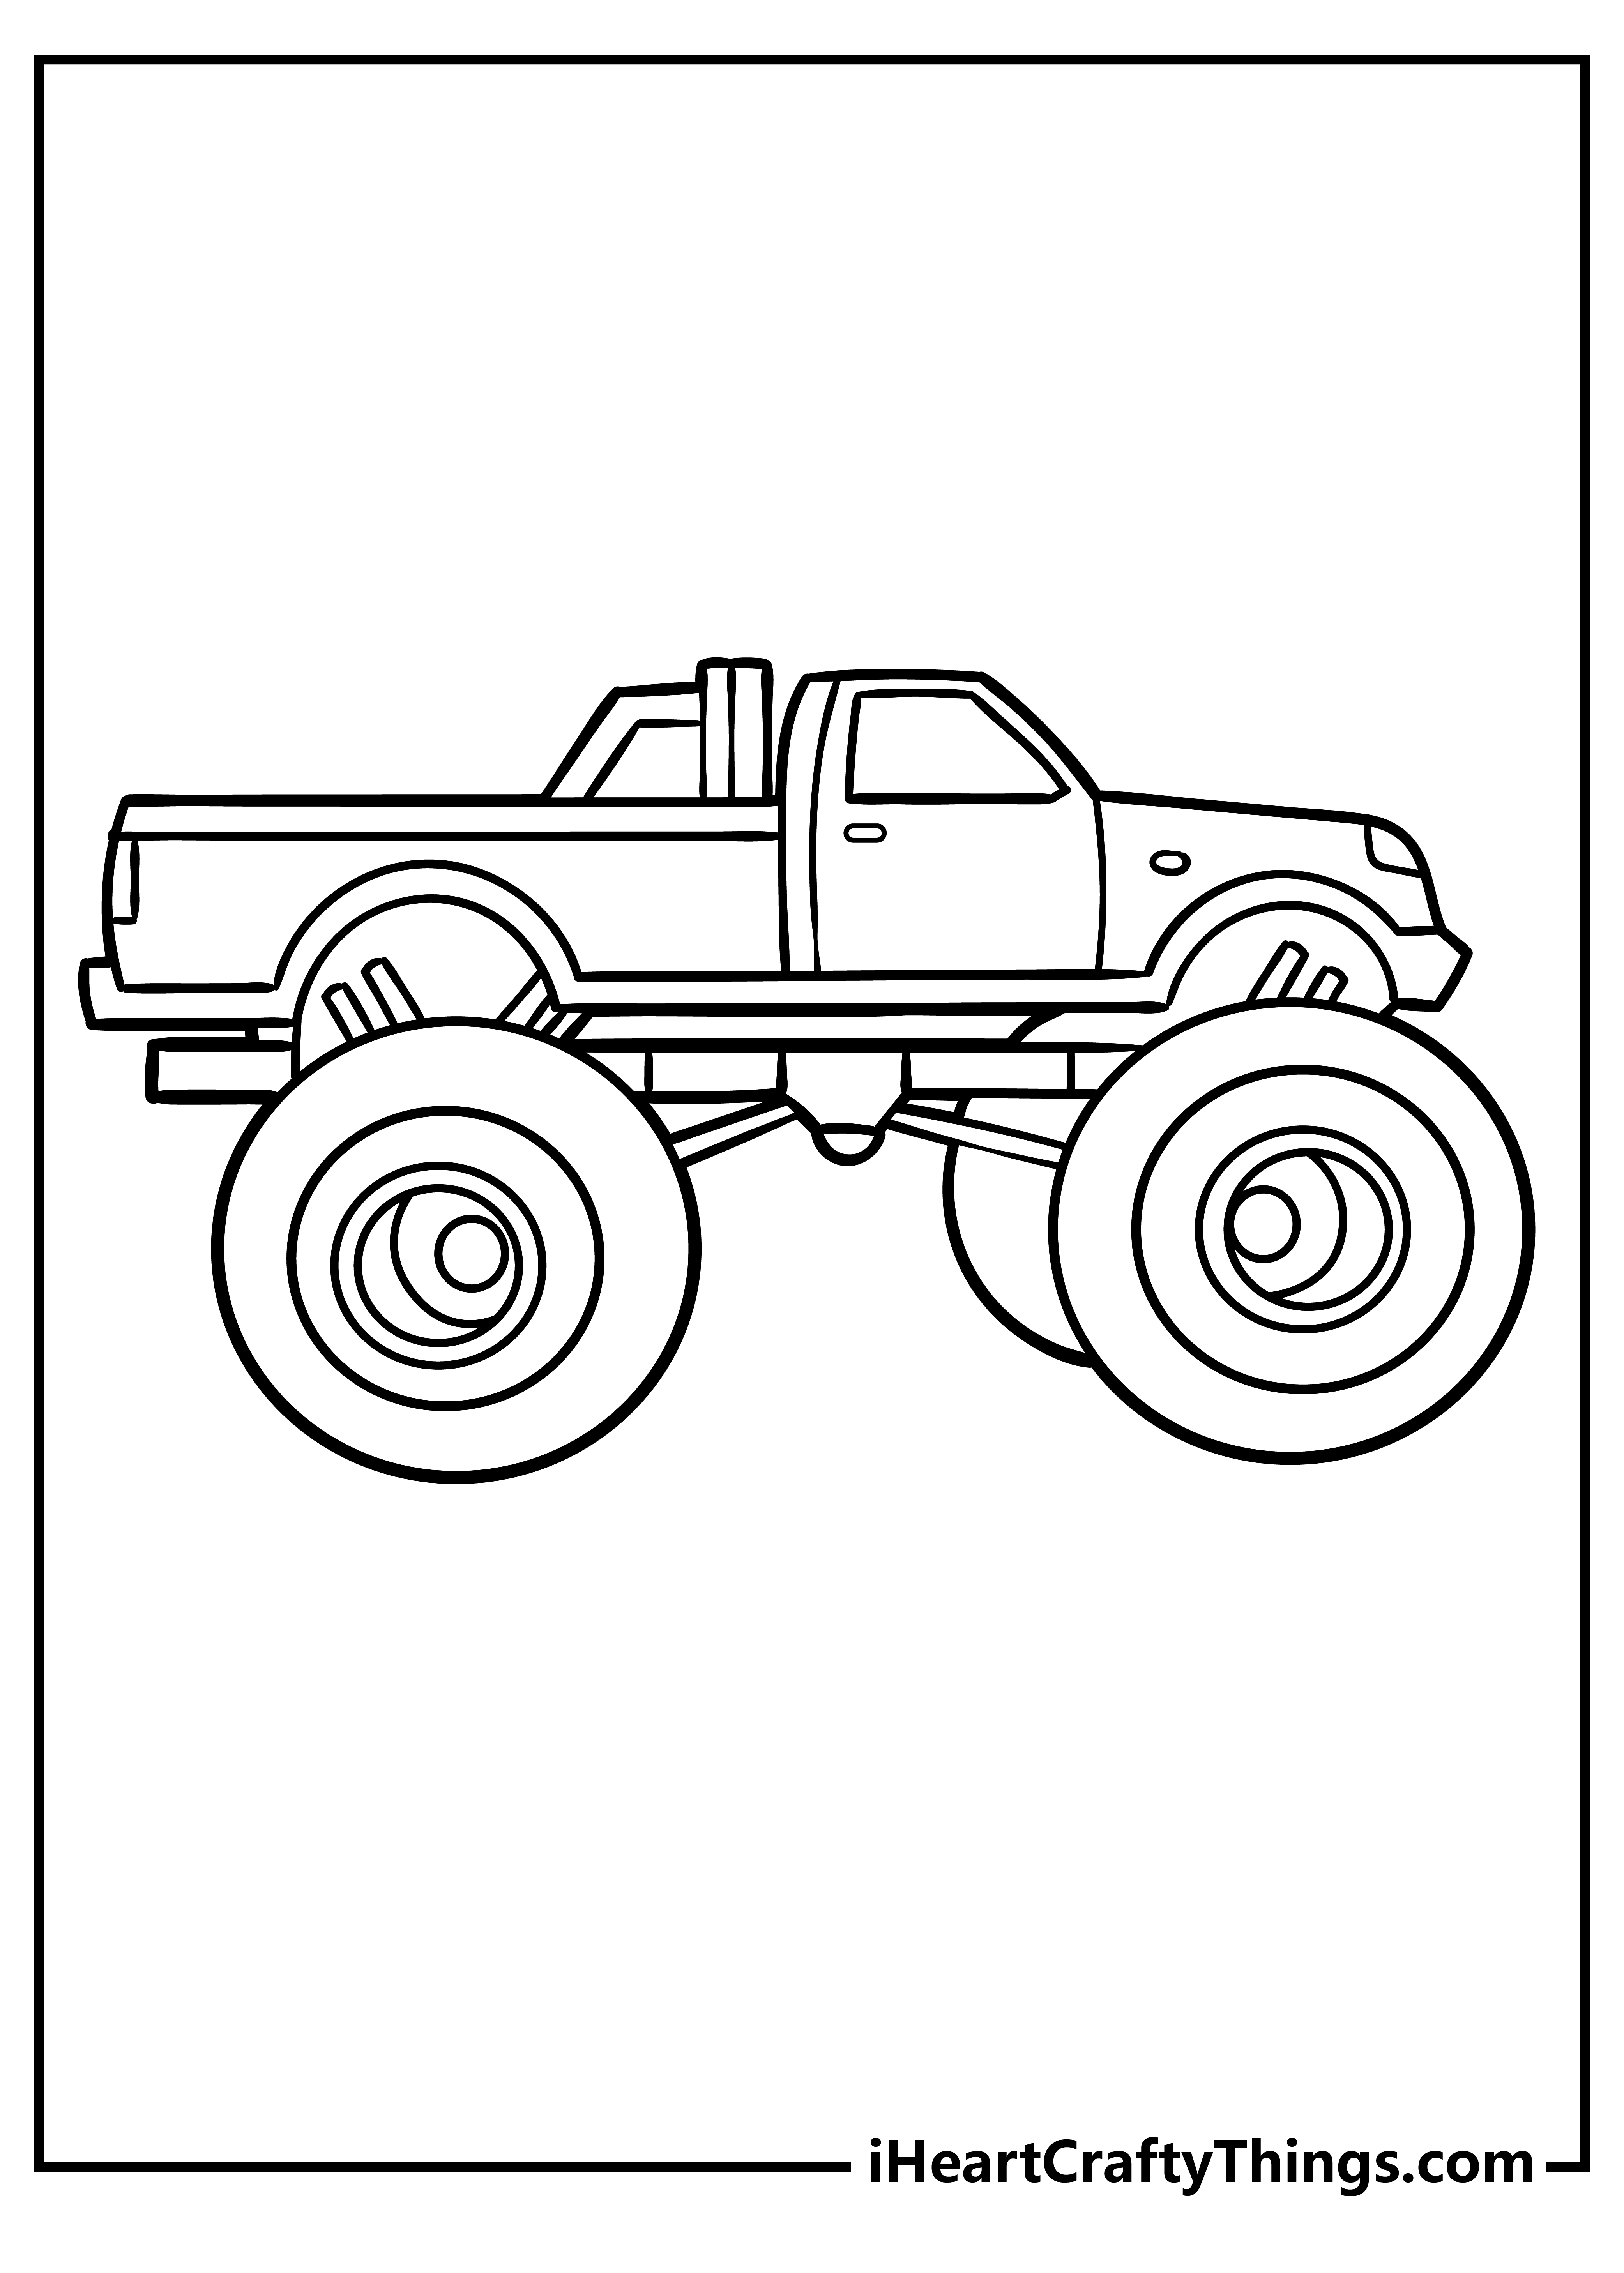 Monster Truck Coloring Pages for adults free printable